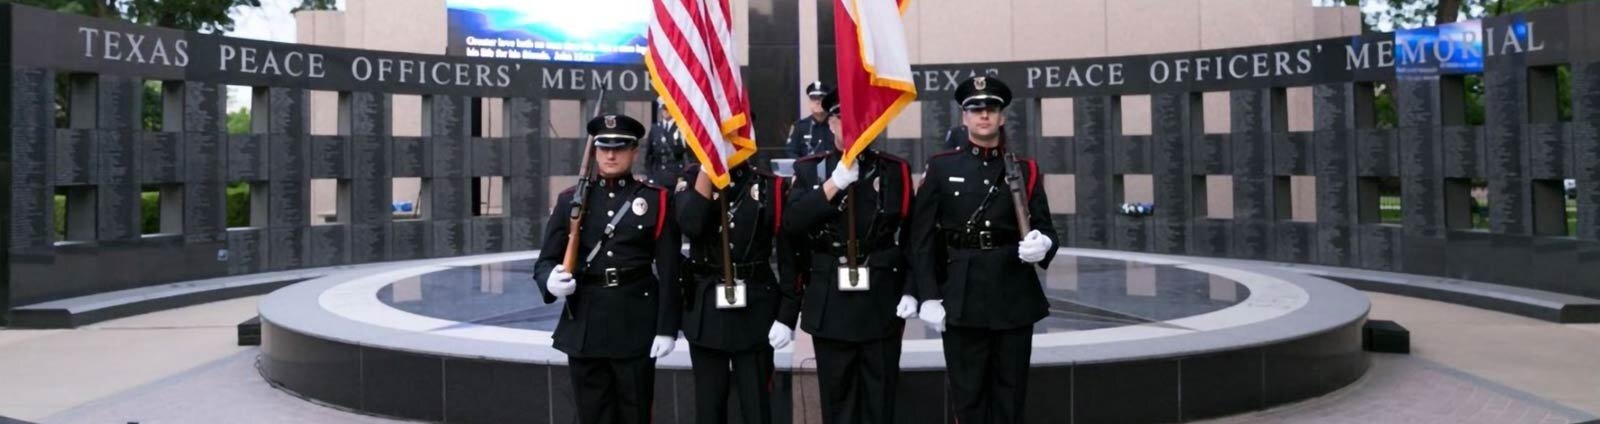 4 Officers in front of the Texas Peace Officer Memorial